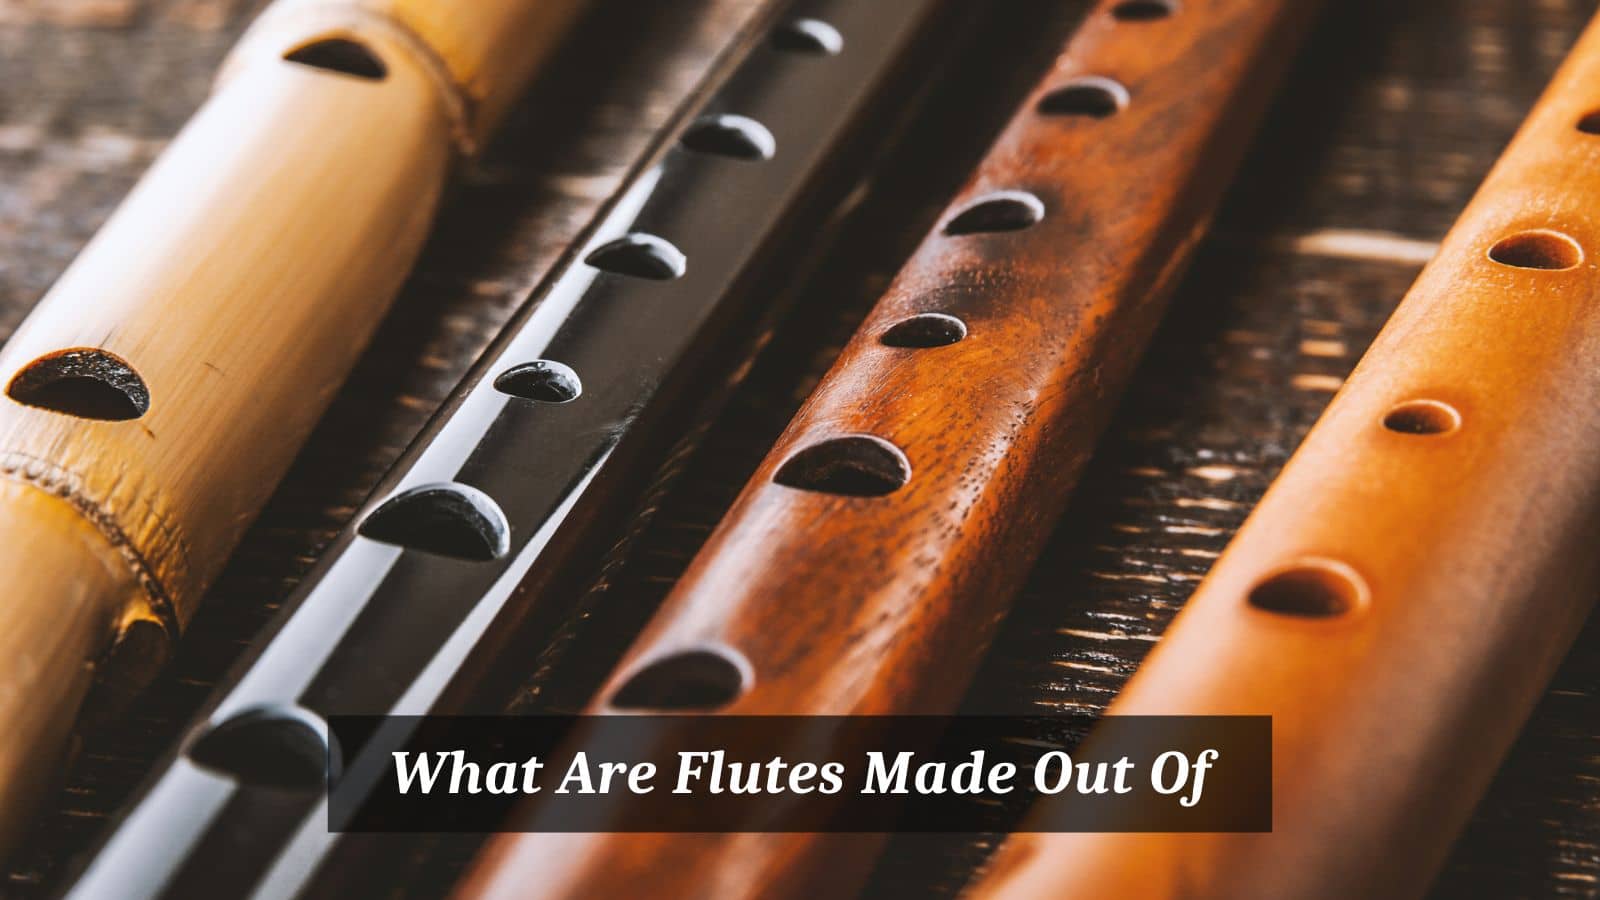 What Are Flutes Made Out Of?